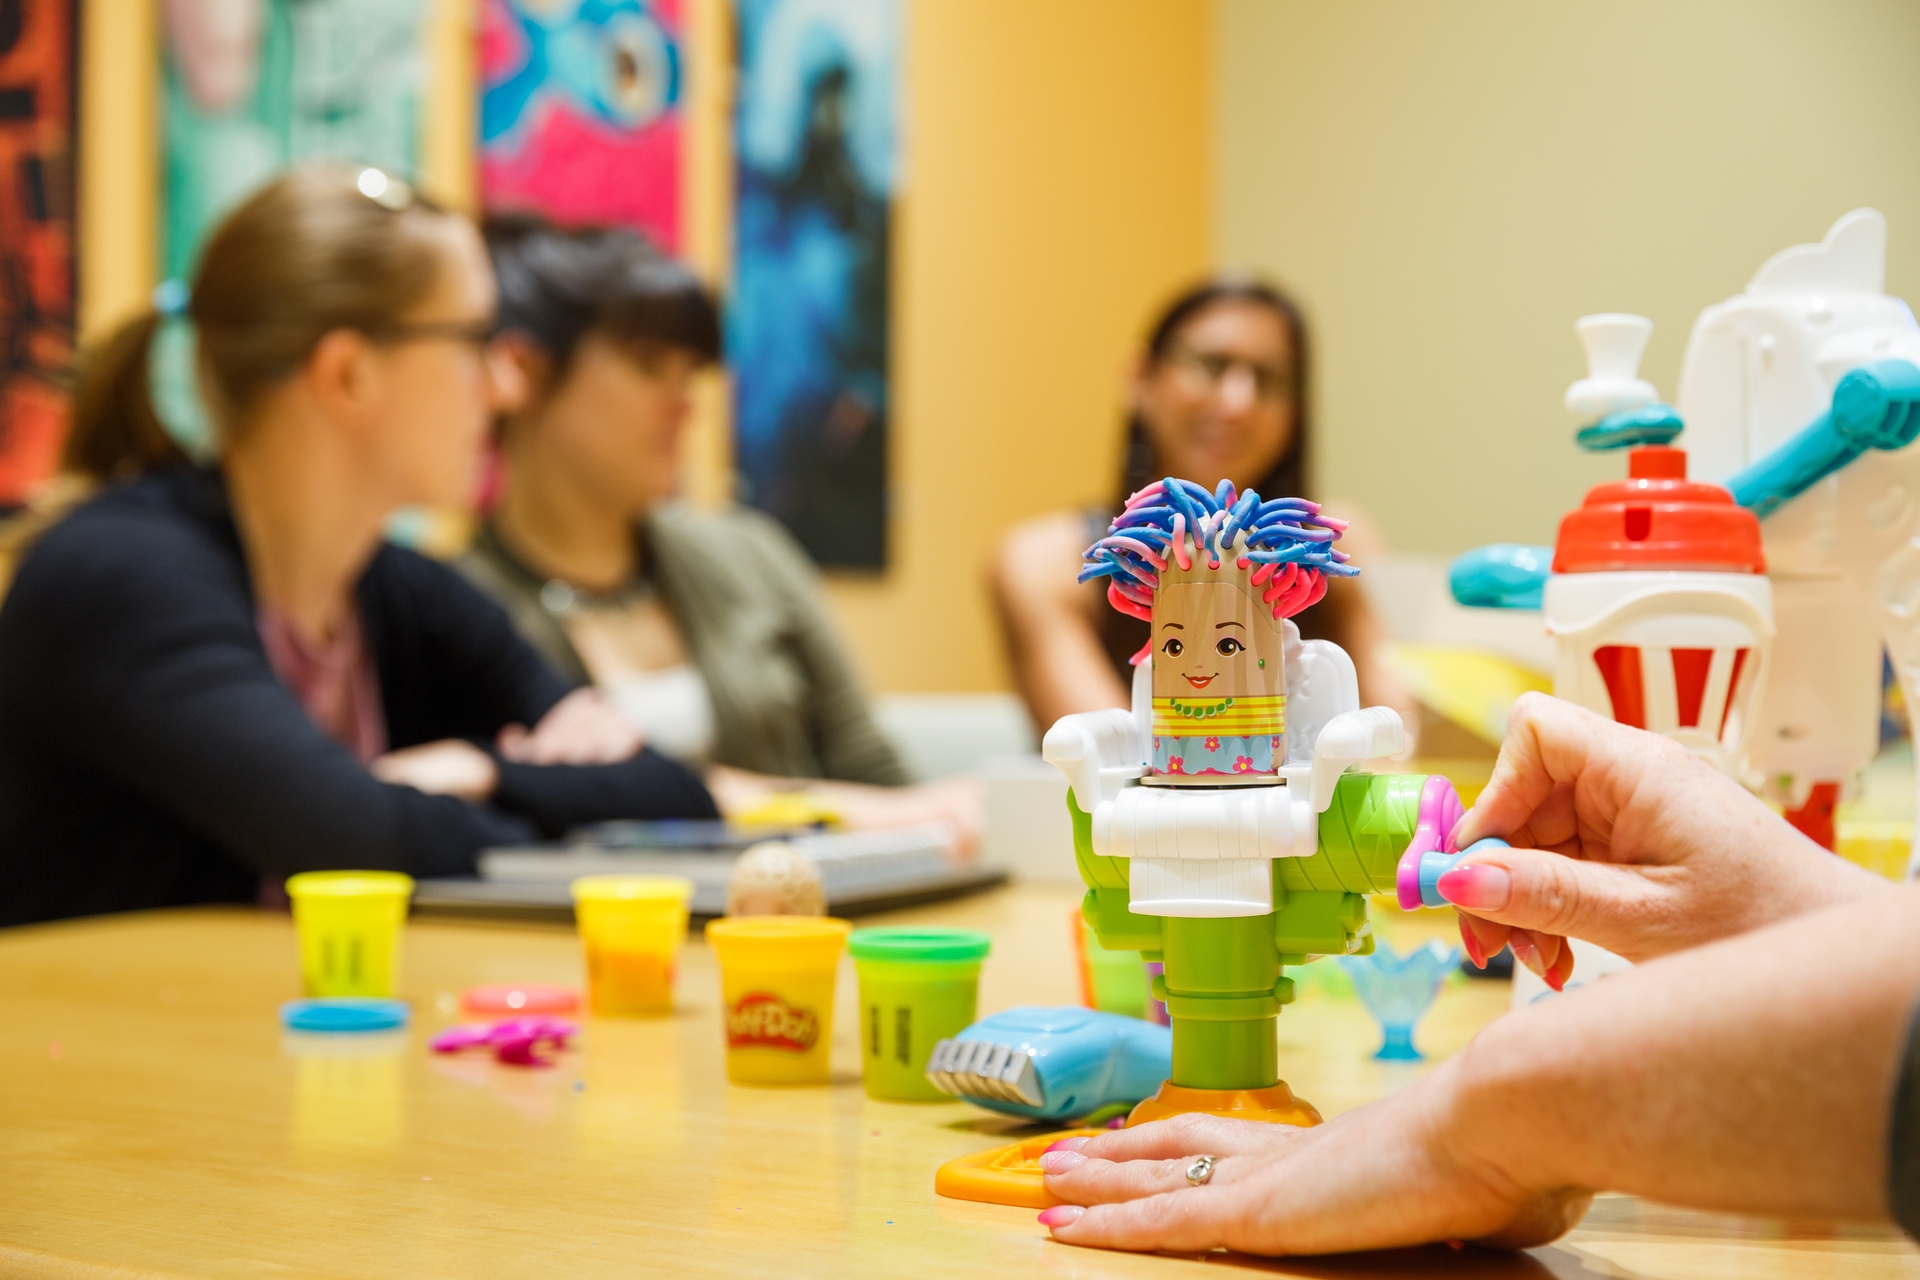 In the foreground, a person turns a crank to demonstrate a Play-Doh toy. In the background, three women sit at a conference table.